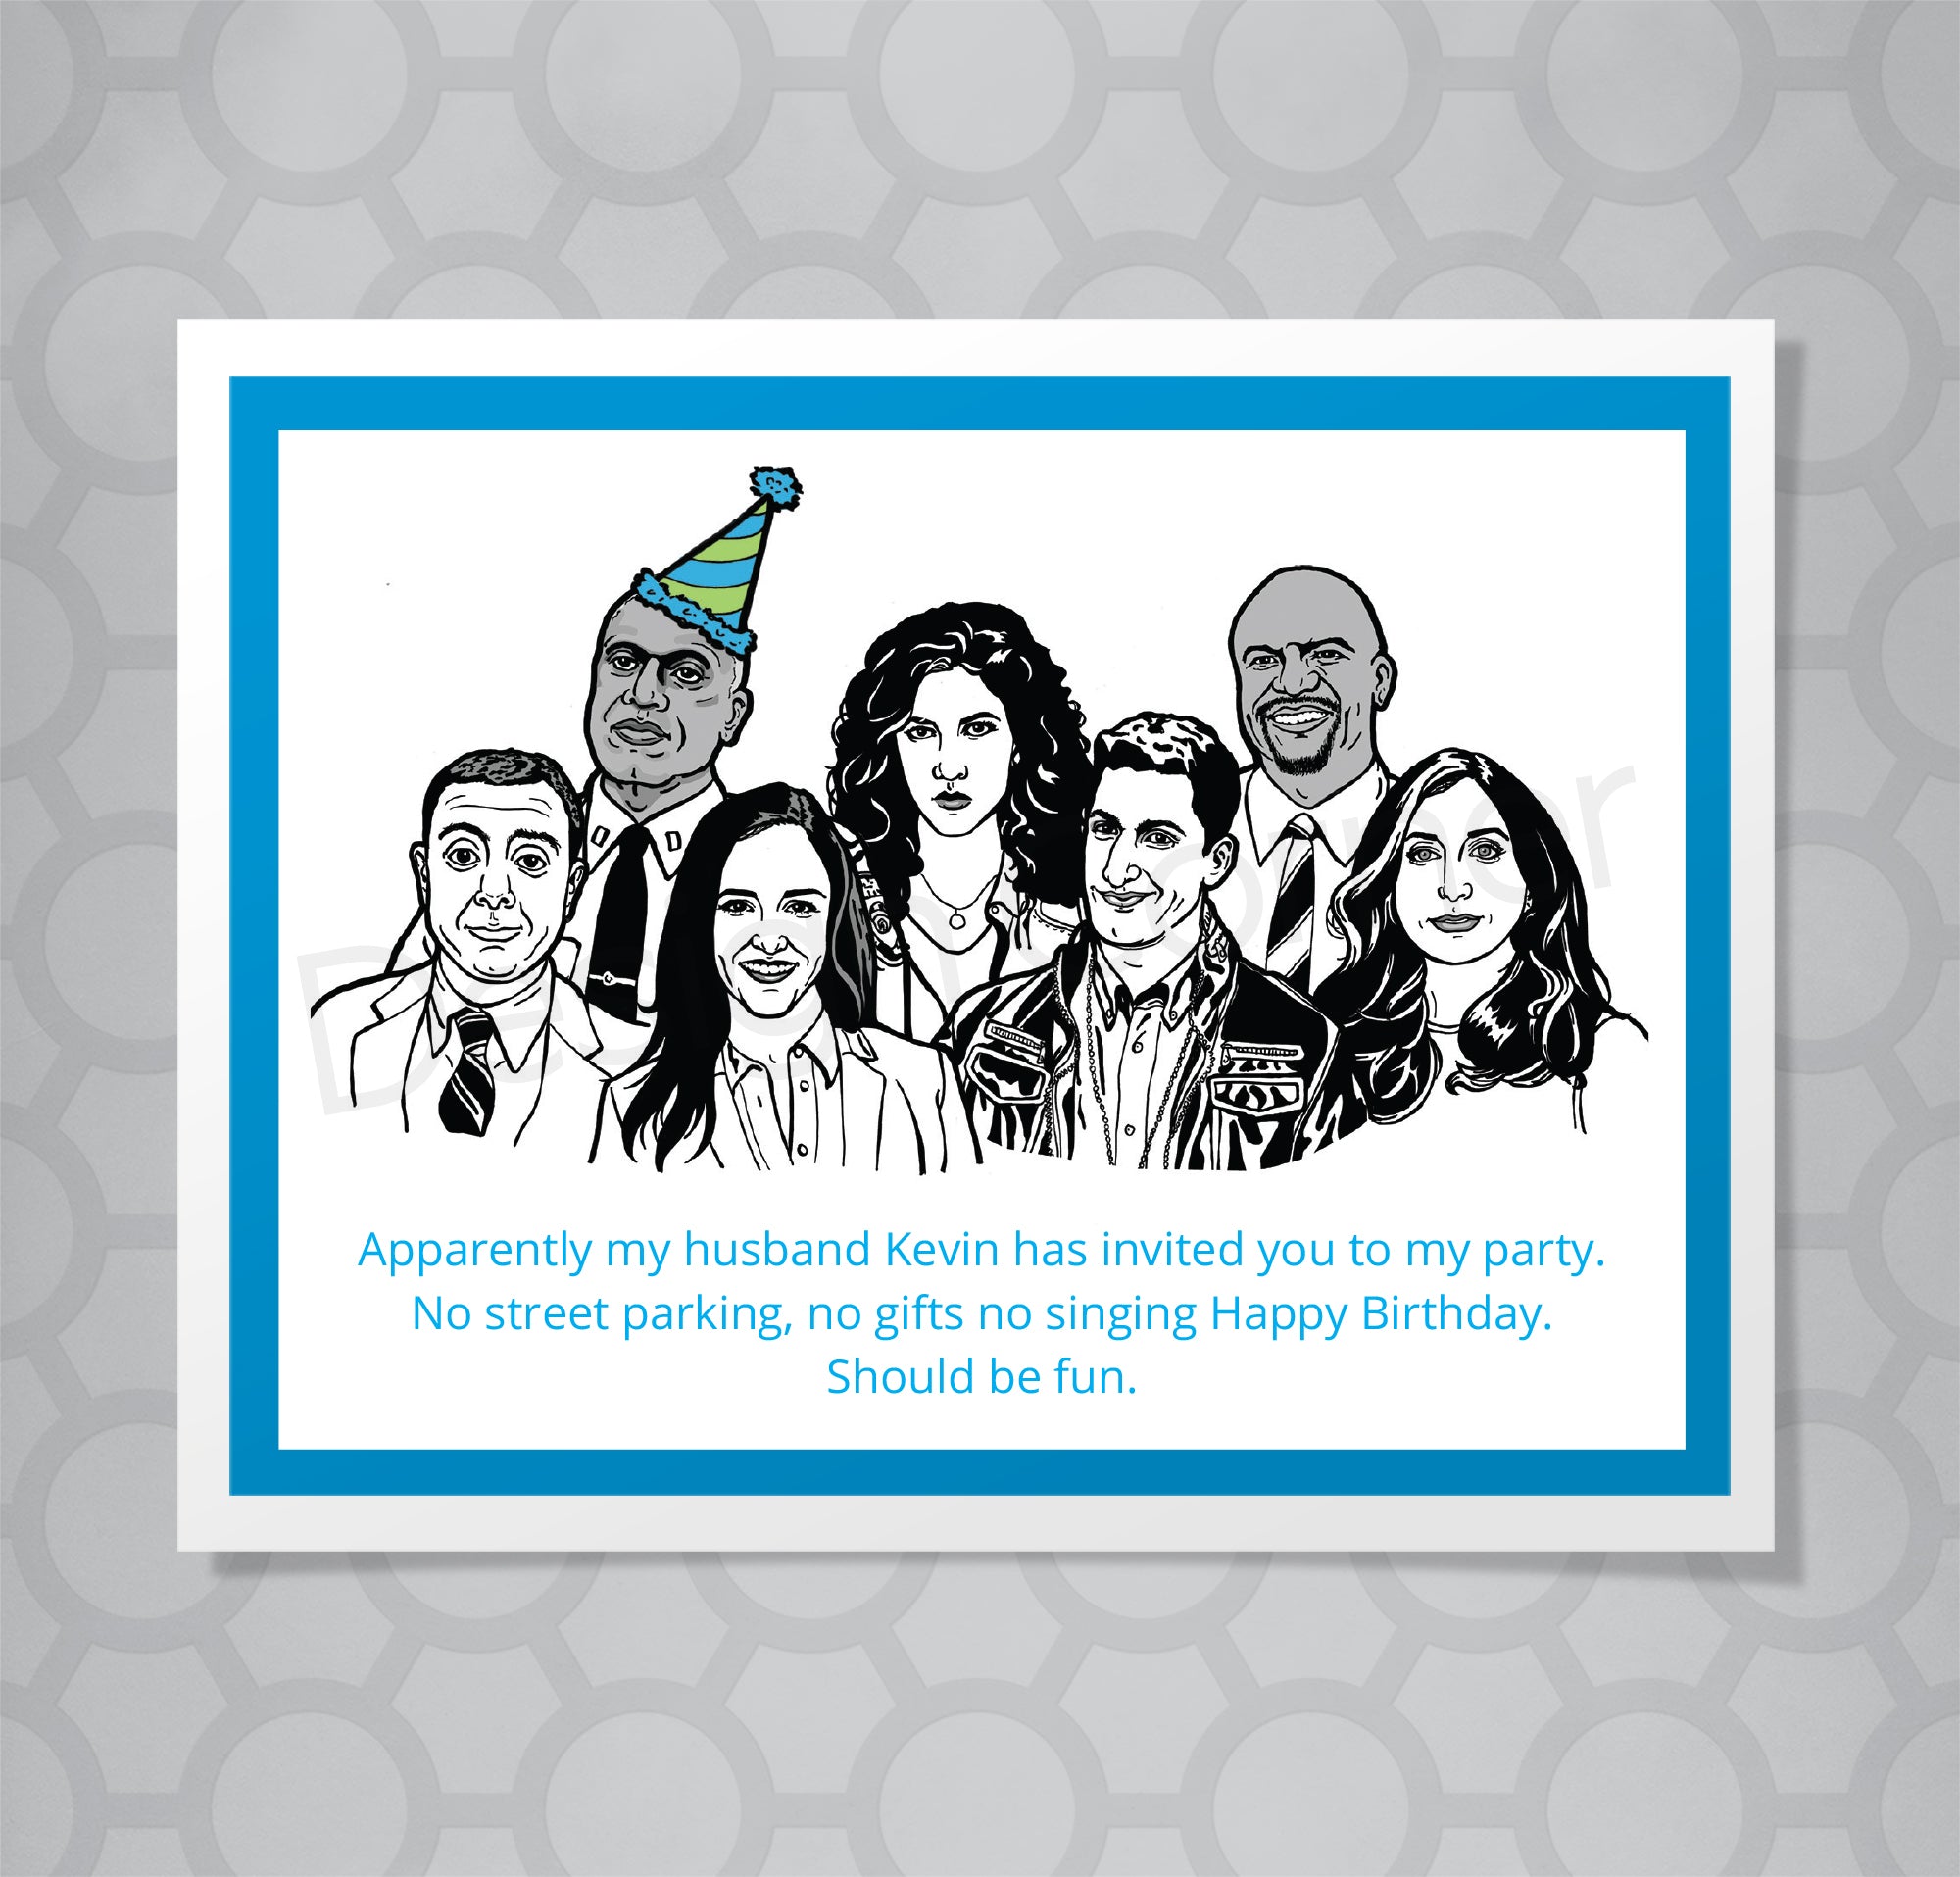 Greeting card with illustration of Brooklyn Nine Nine's cast. Captain Holt is wearing a birthday hat. Caption says "Apparently my husband Kevin has invited you to my party. No street parking, no gifts, no singing Happy Birthday. Should be fun."